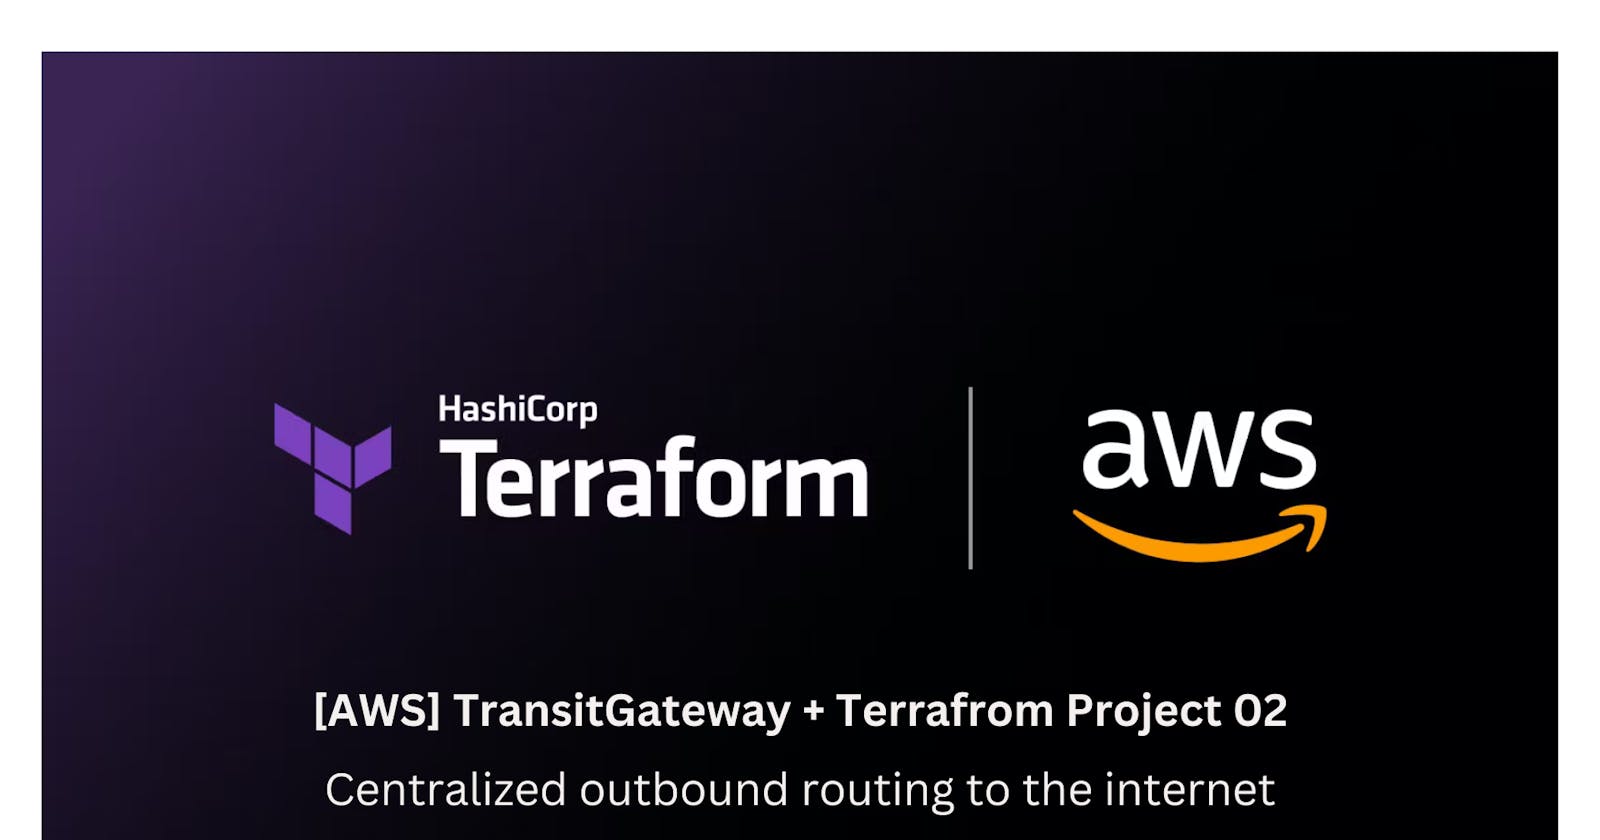 [AWS] TransitGateway + Terrafrom Project 02